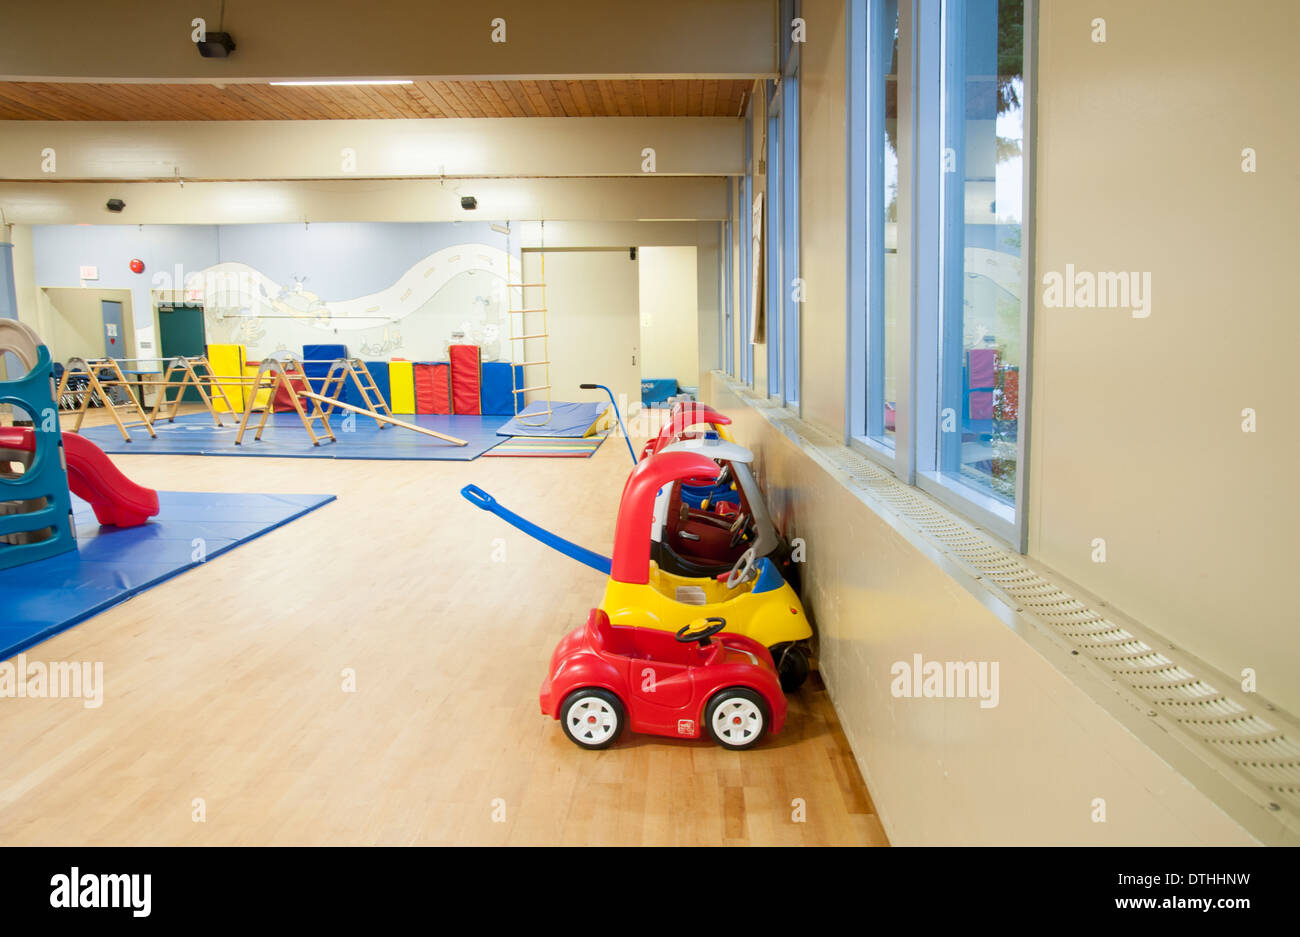 Children's toys inside a daycare play area Stock Photo